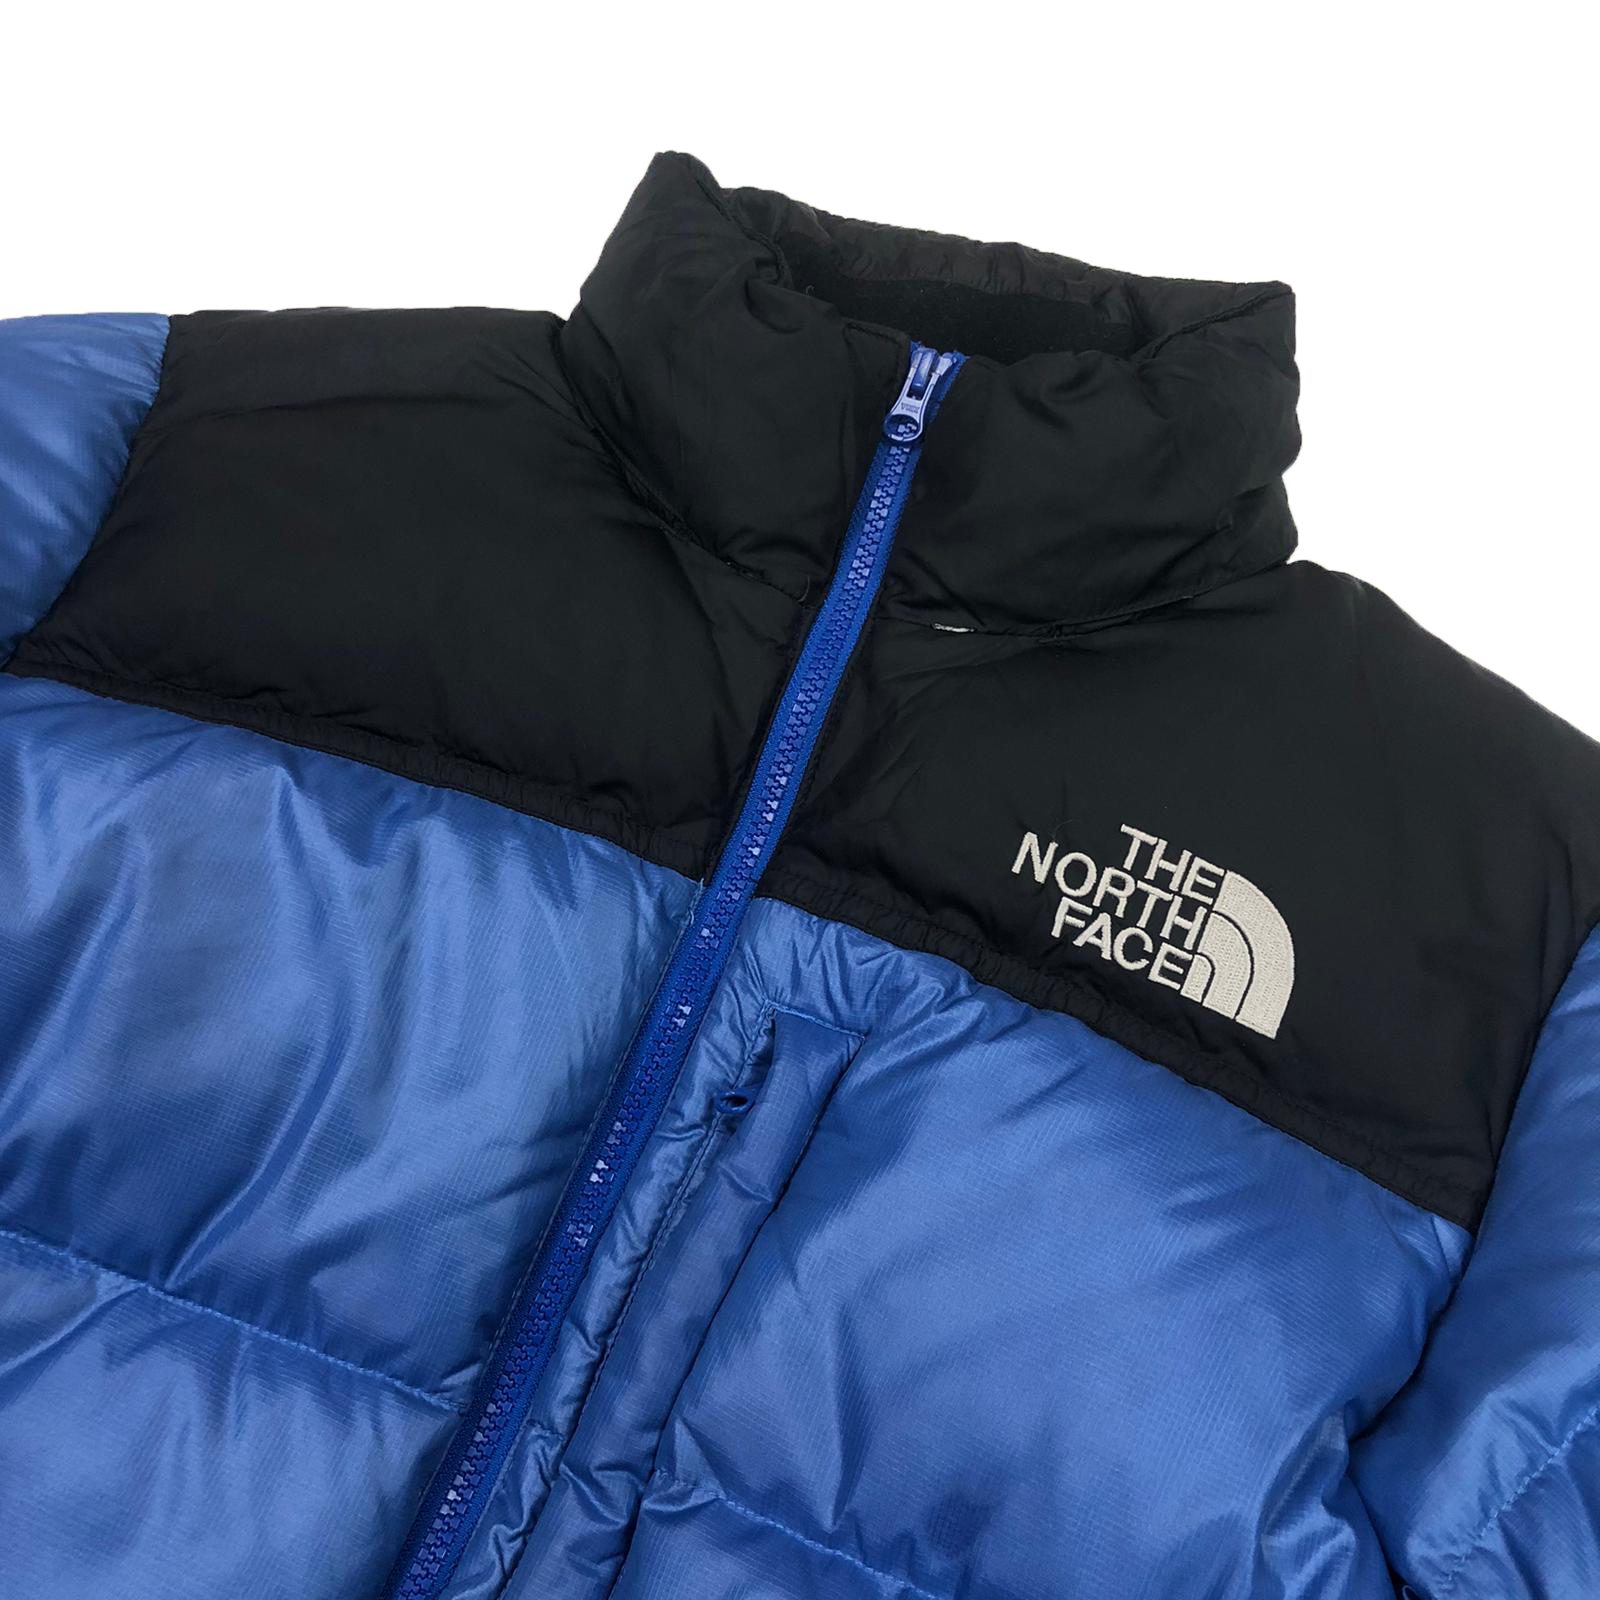 The North Face 700 puffer